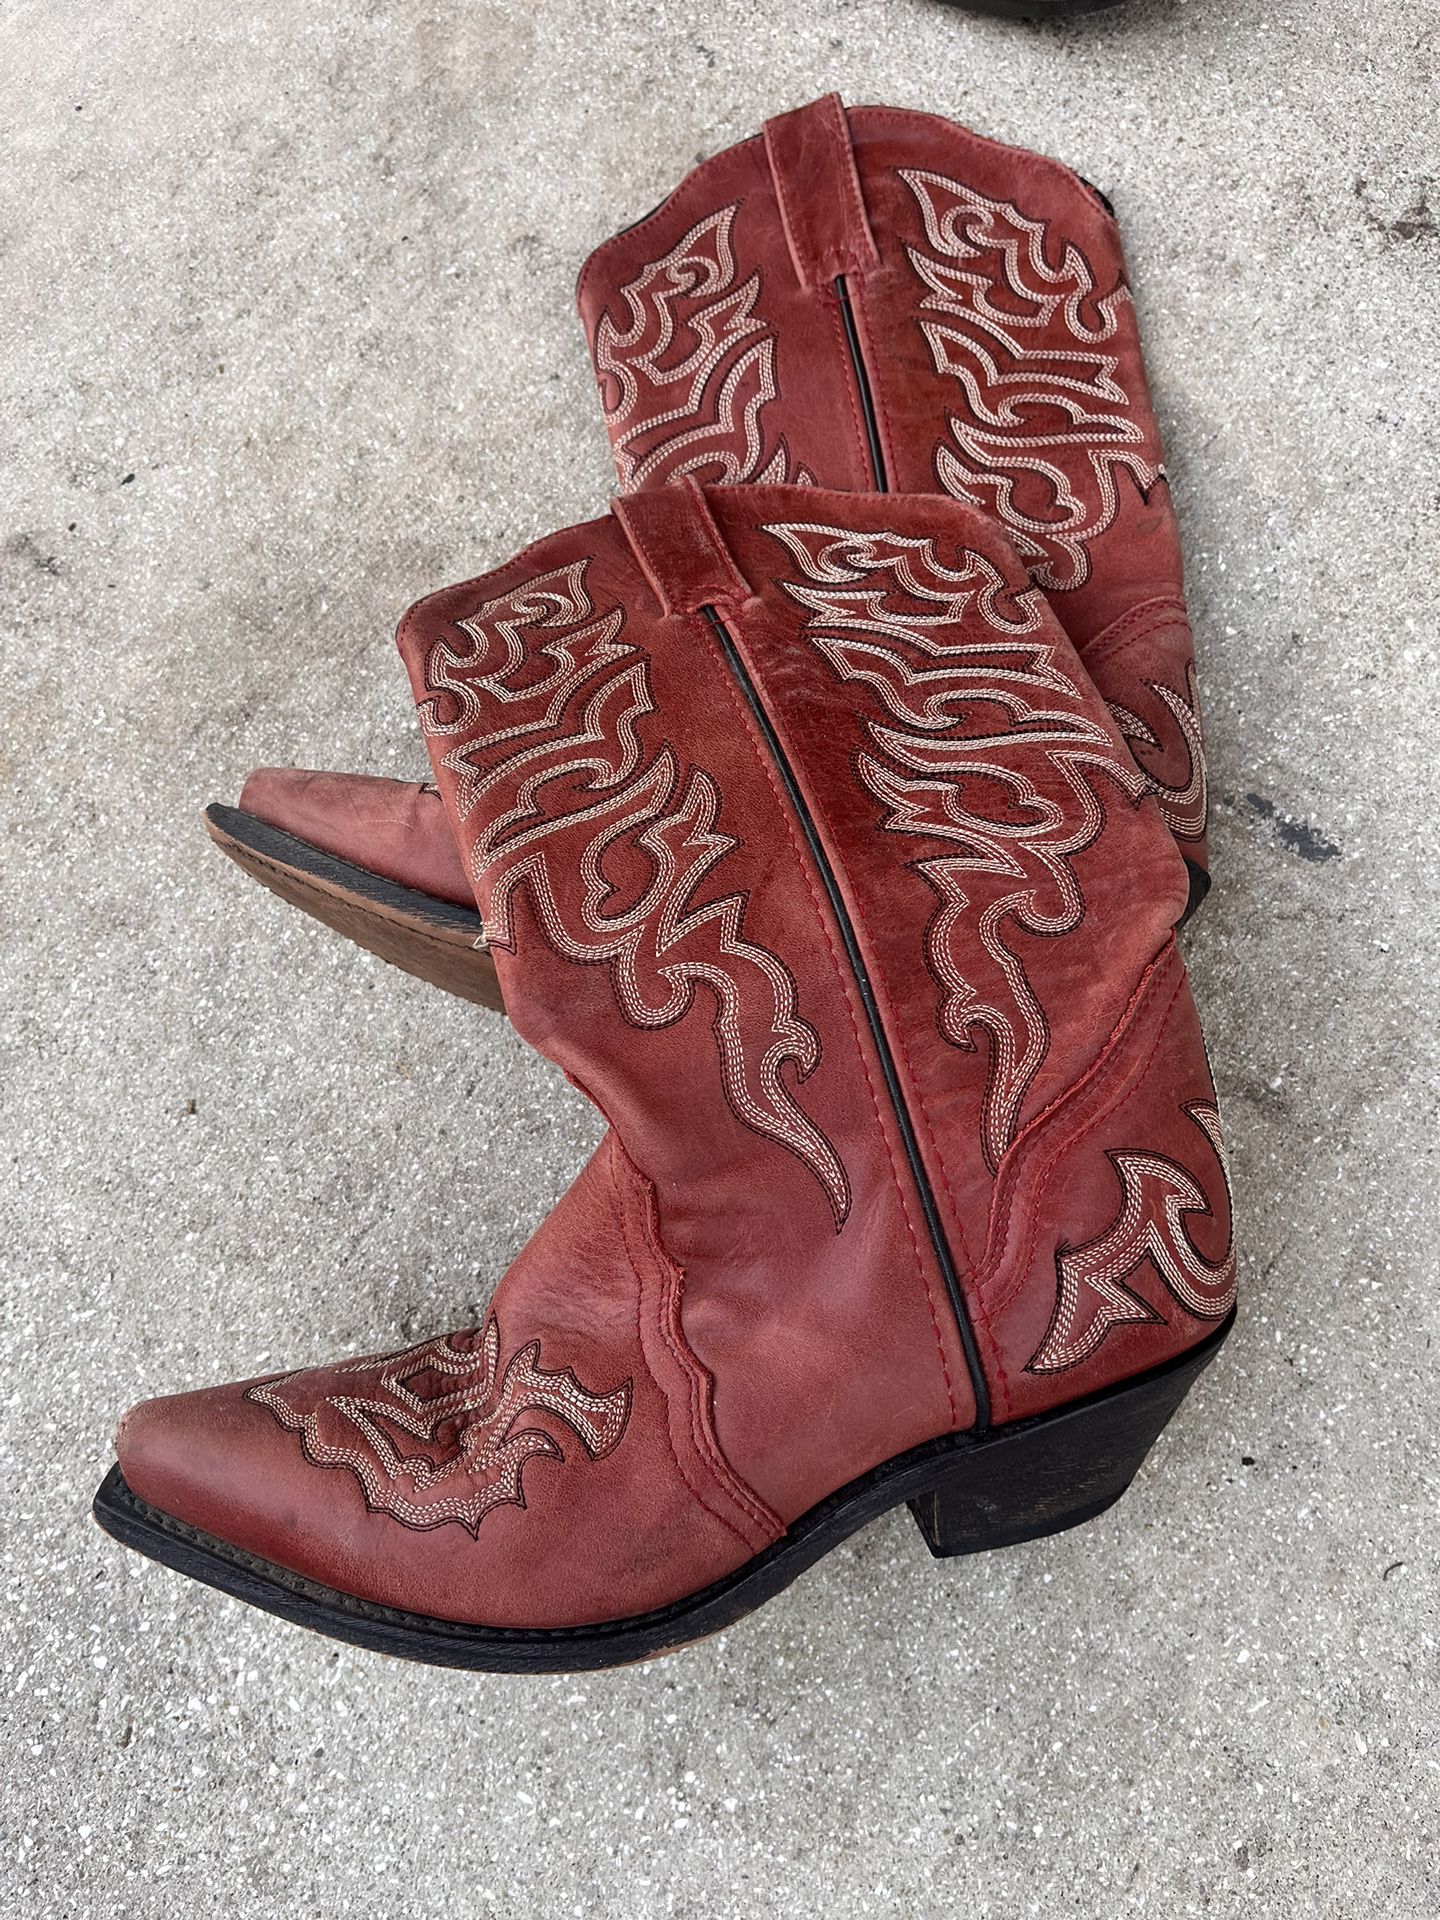 Women’s Size 7.5 Cowgirl Boots RC5001